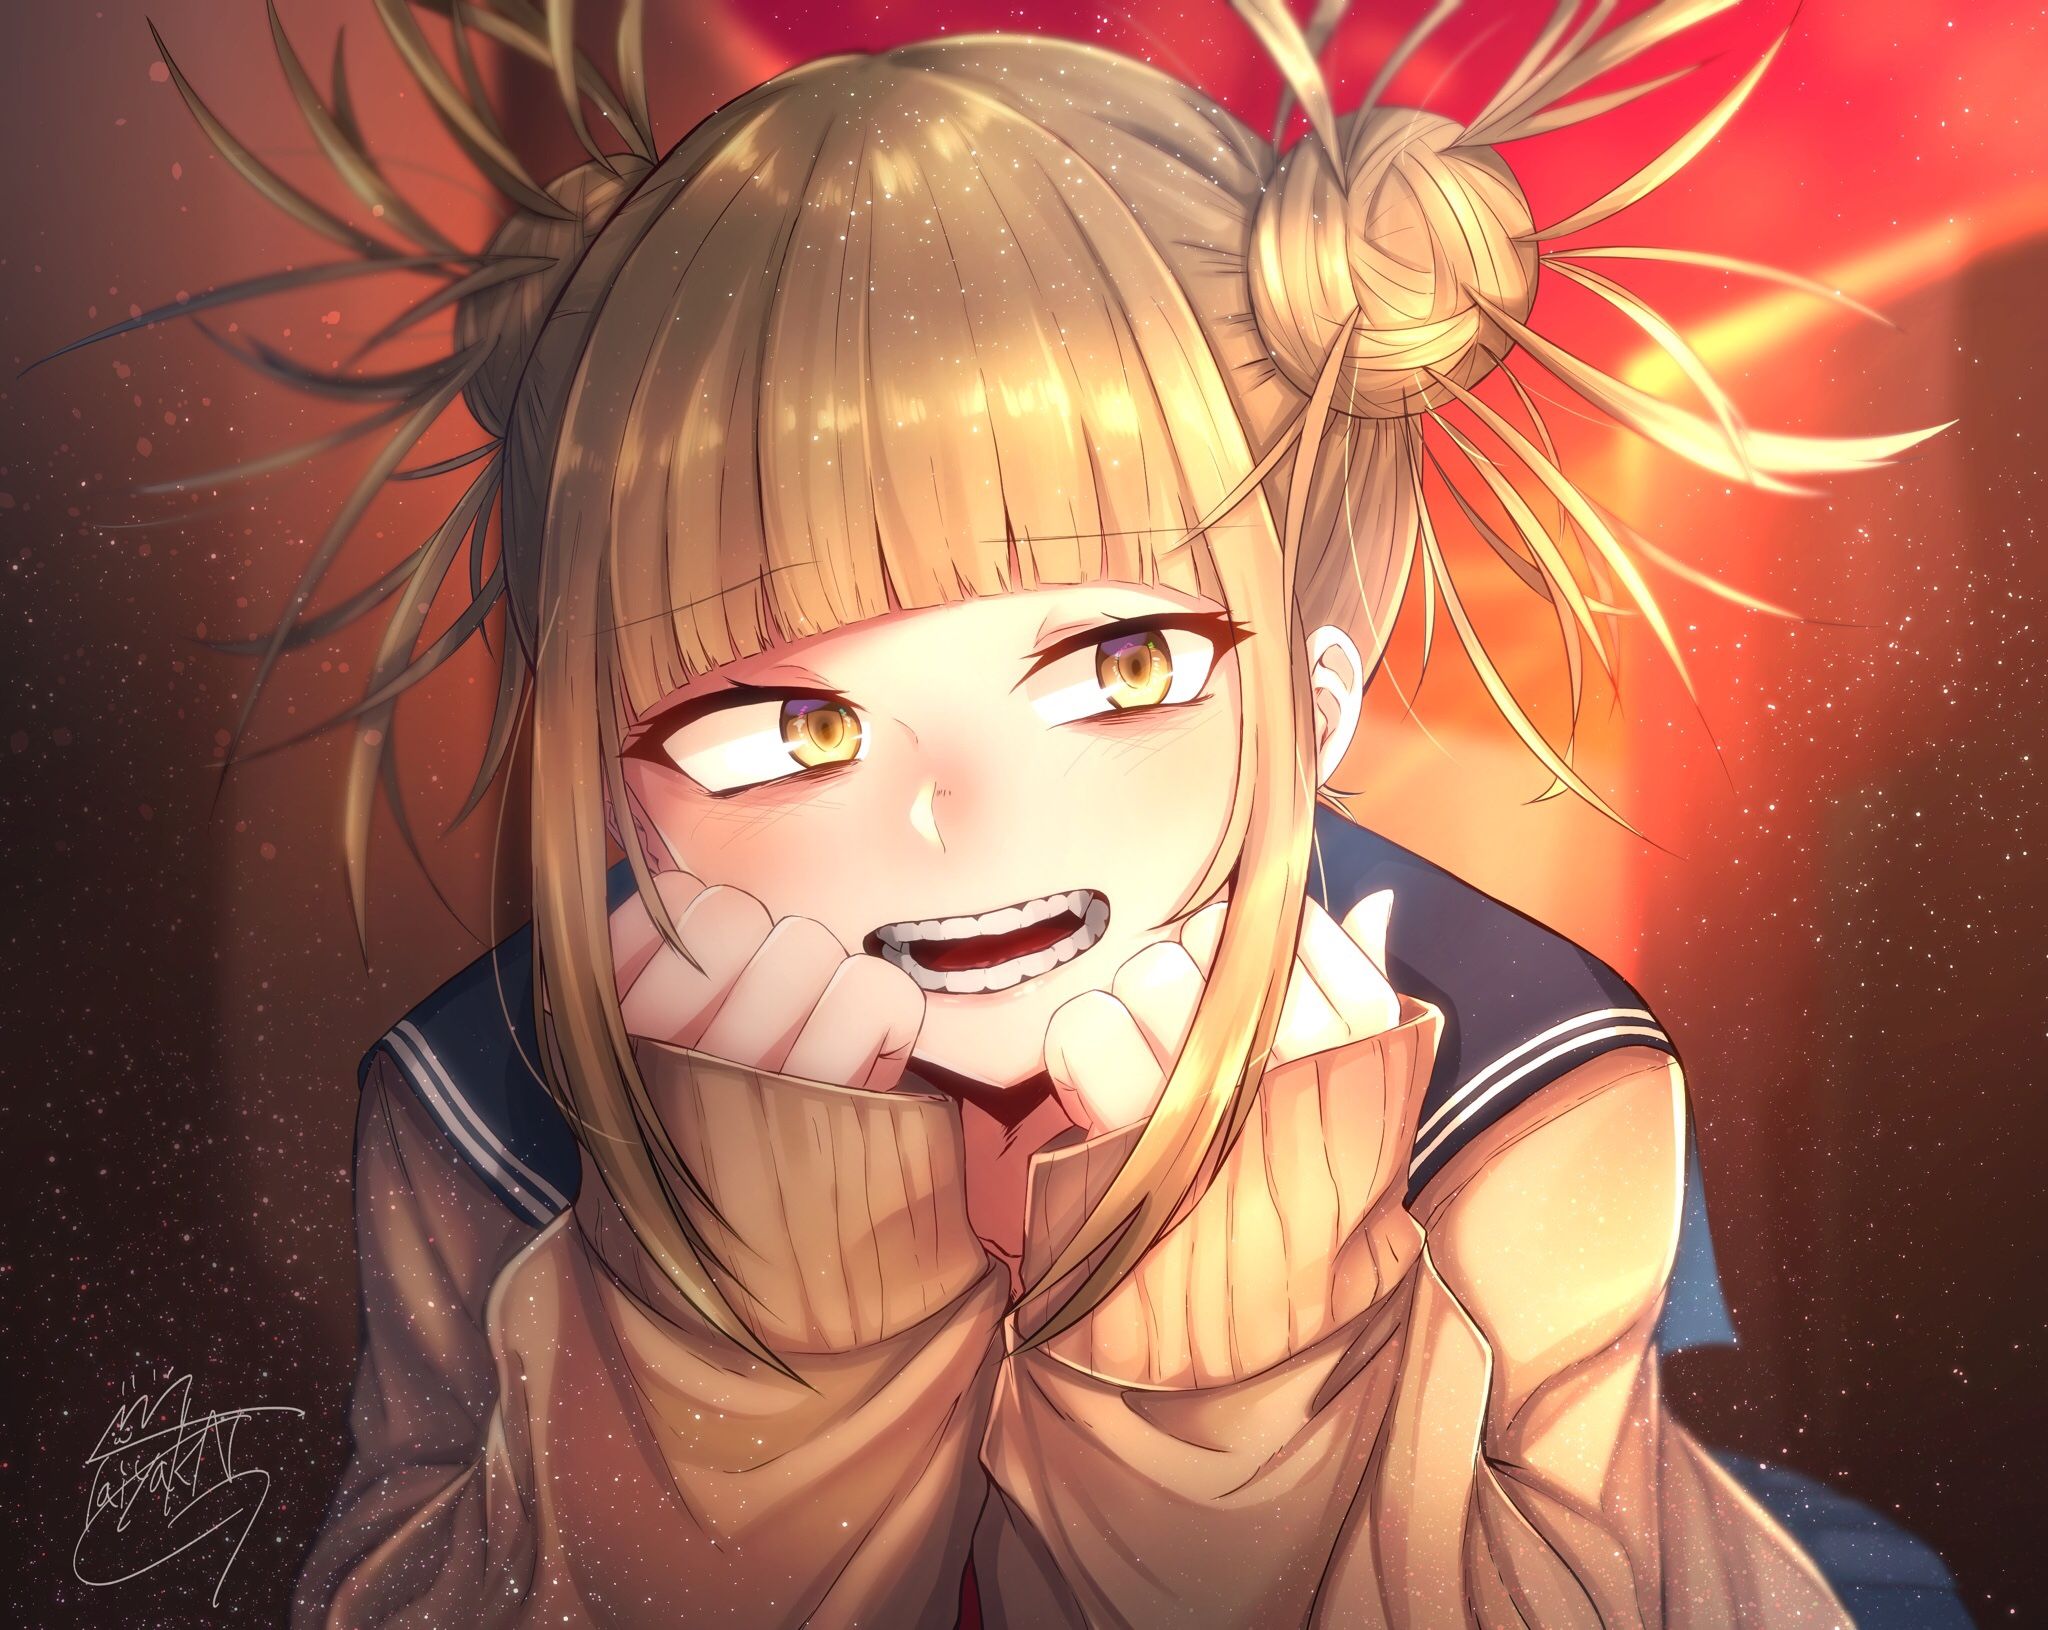 Himiko Toga in love HD Wallpaper. Background Imagex1630